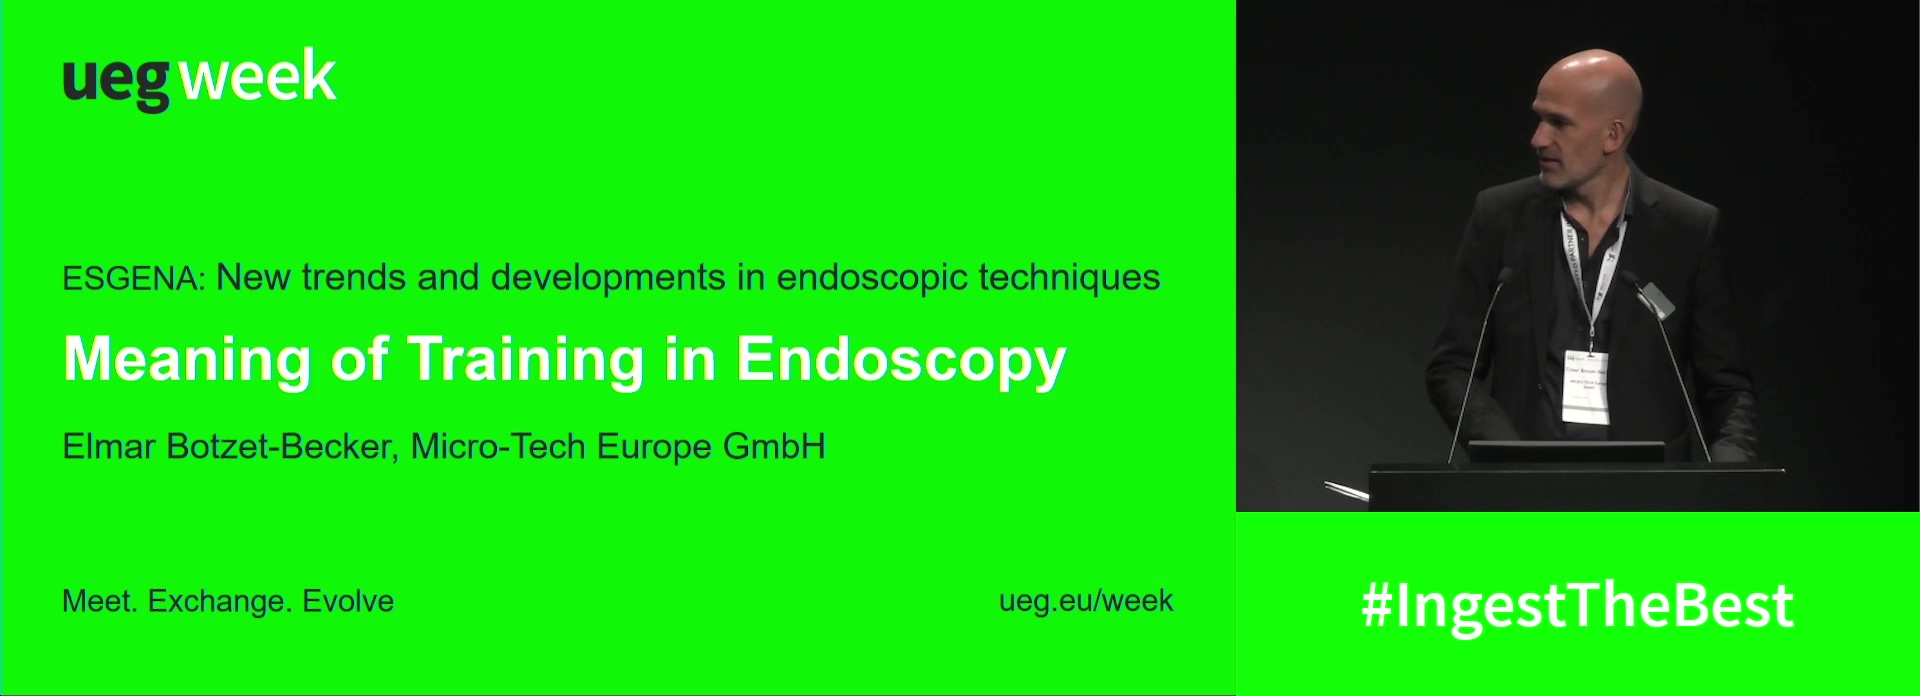 Meaning of training in endoscopy